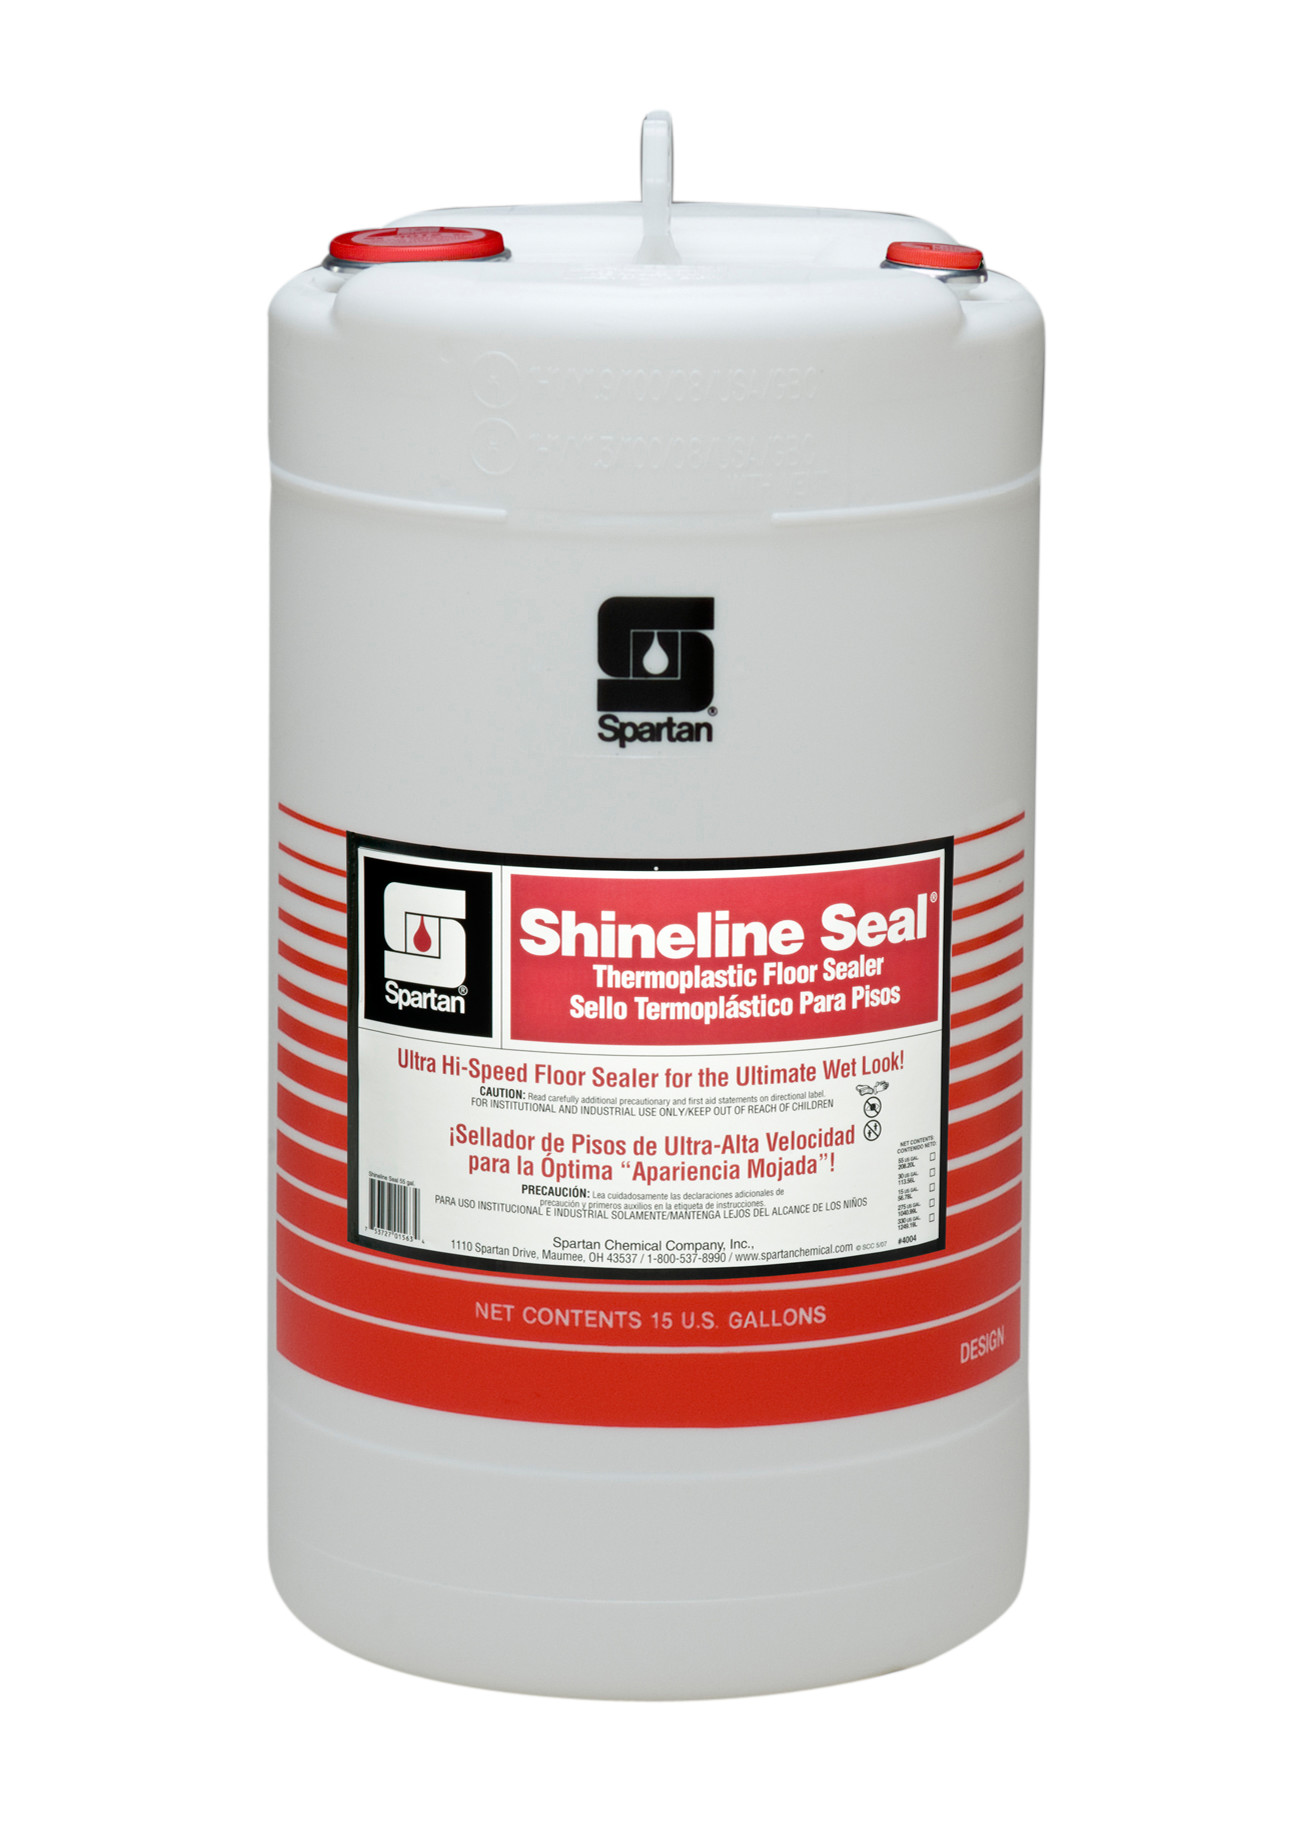 Spartan Chemical Company Shineline Seal, 15 GAL DRUM